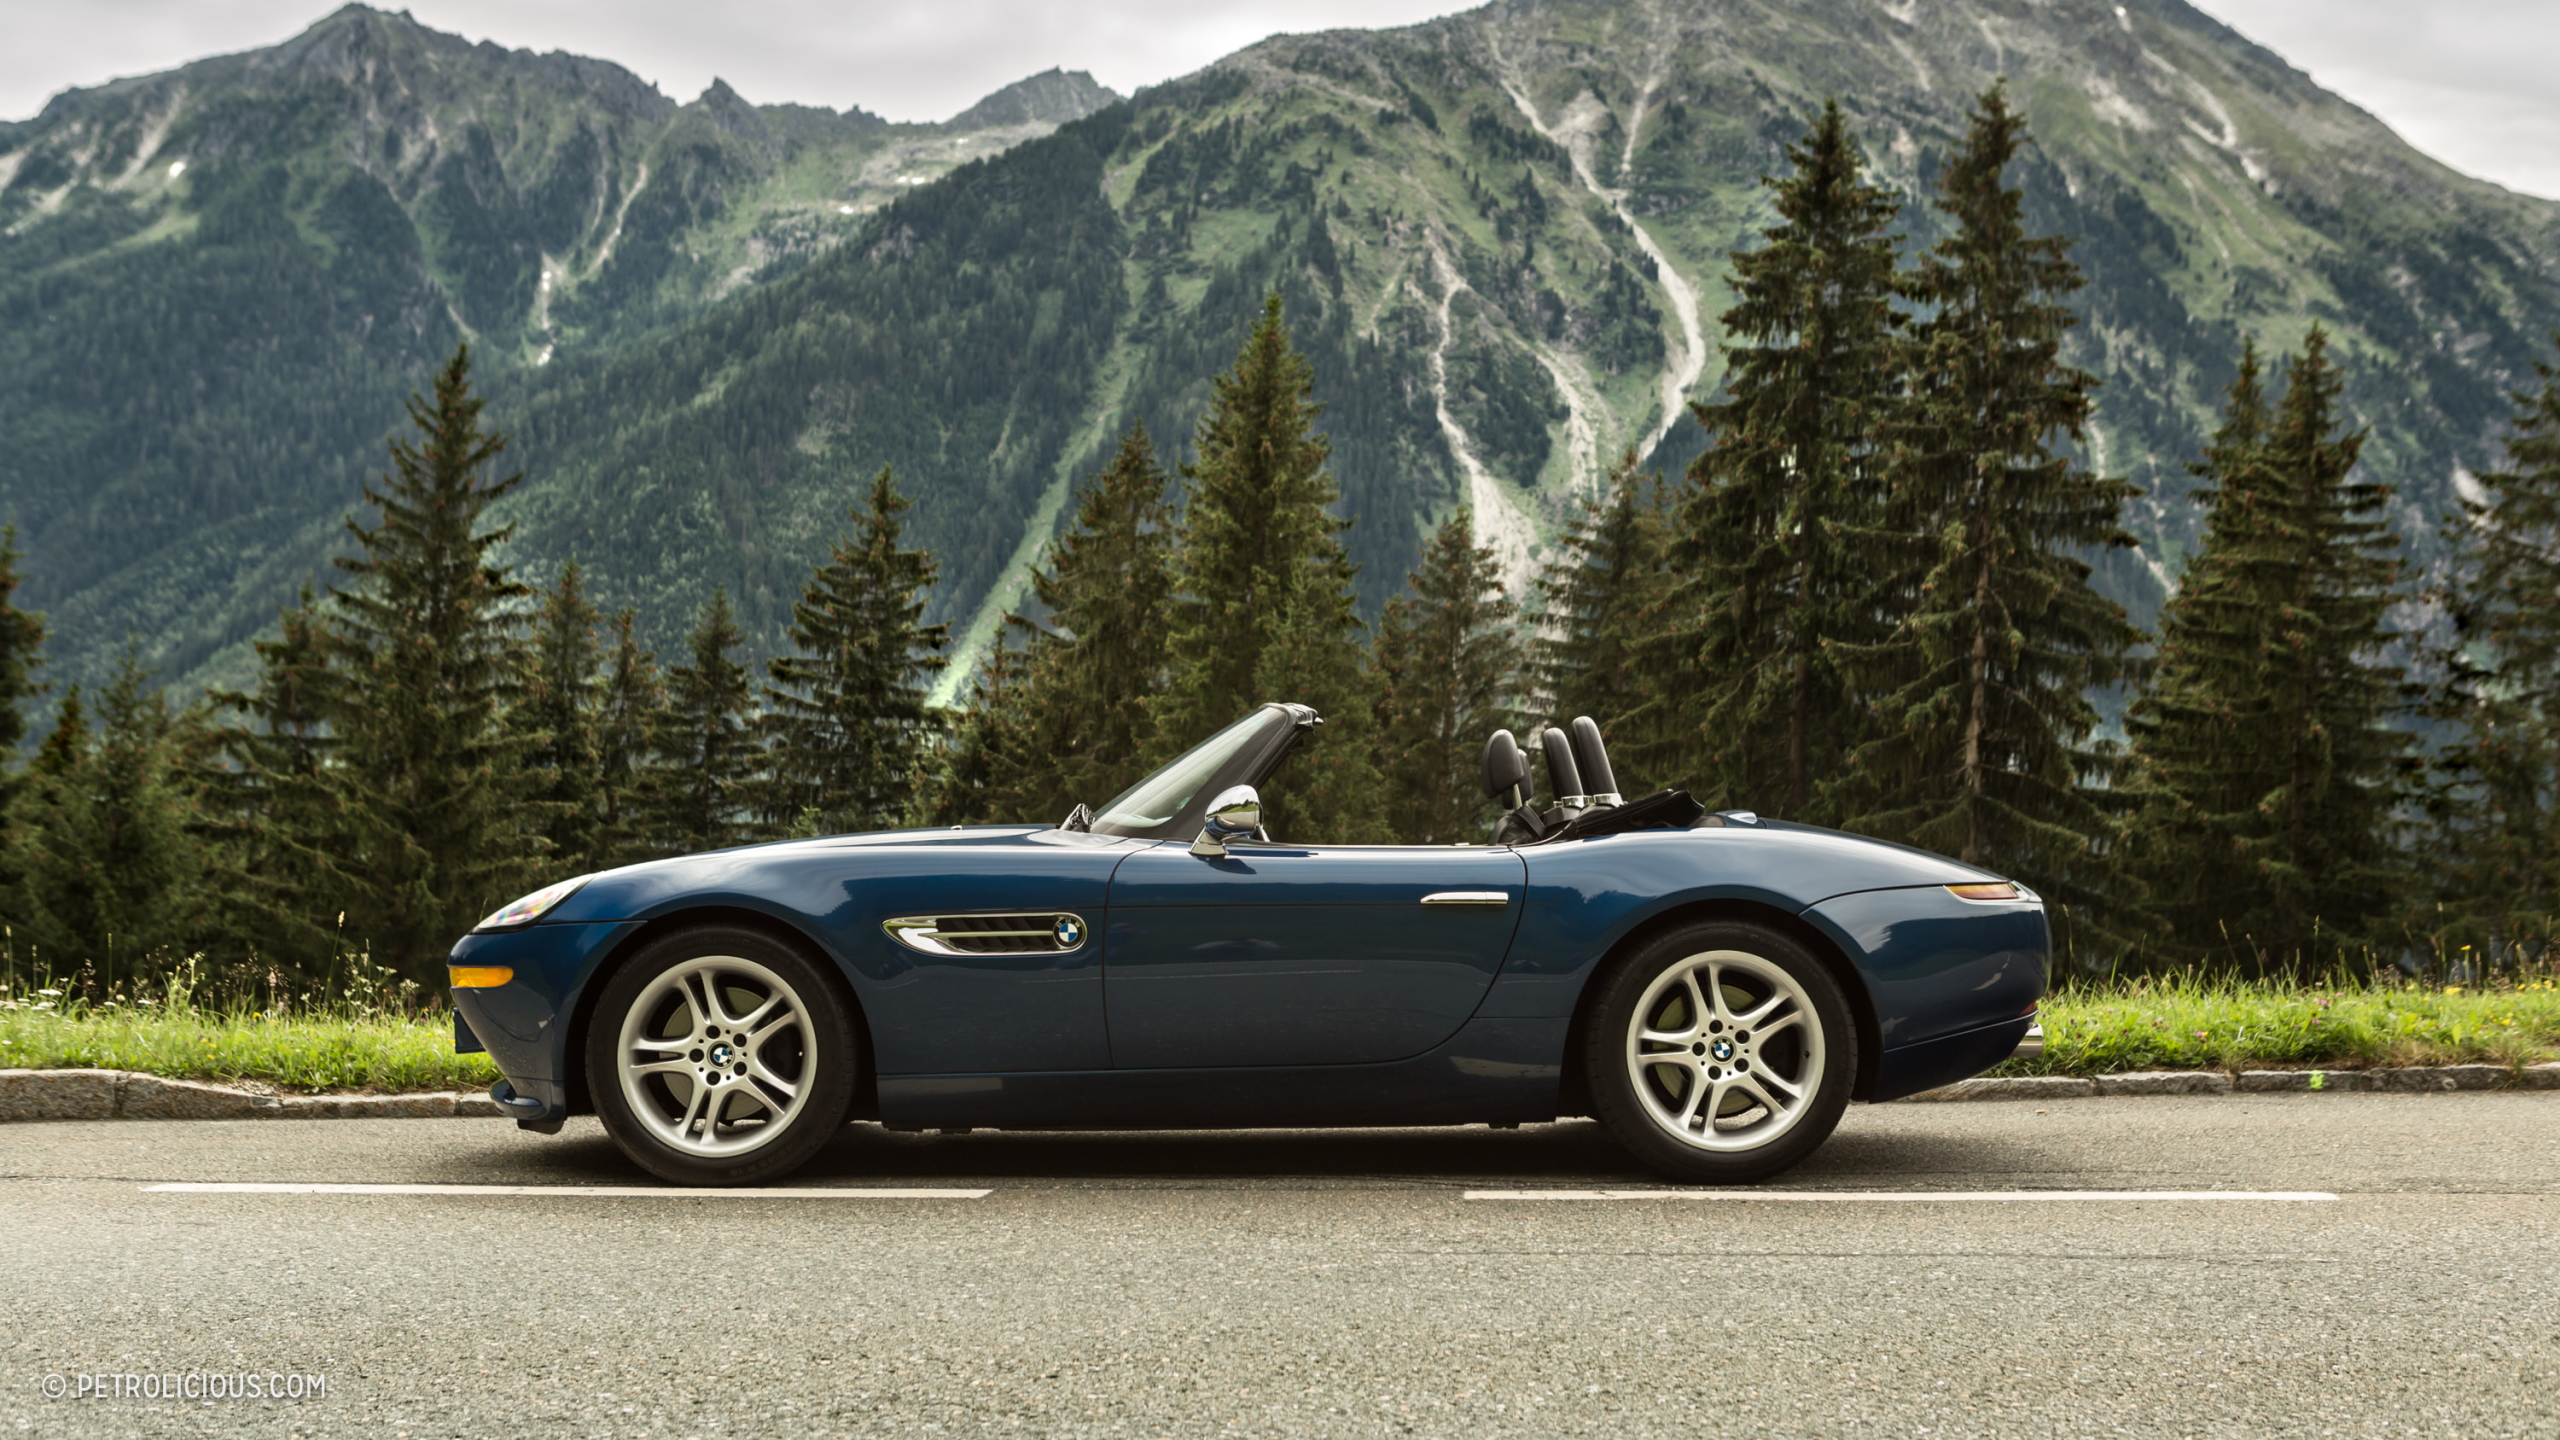 General 2560x1440 BMW Z8 Alps mountains car BMW side view watermarked German cars convertible Roadster